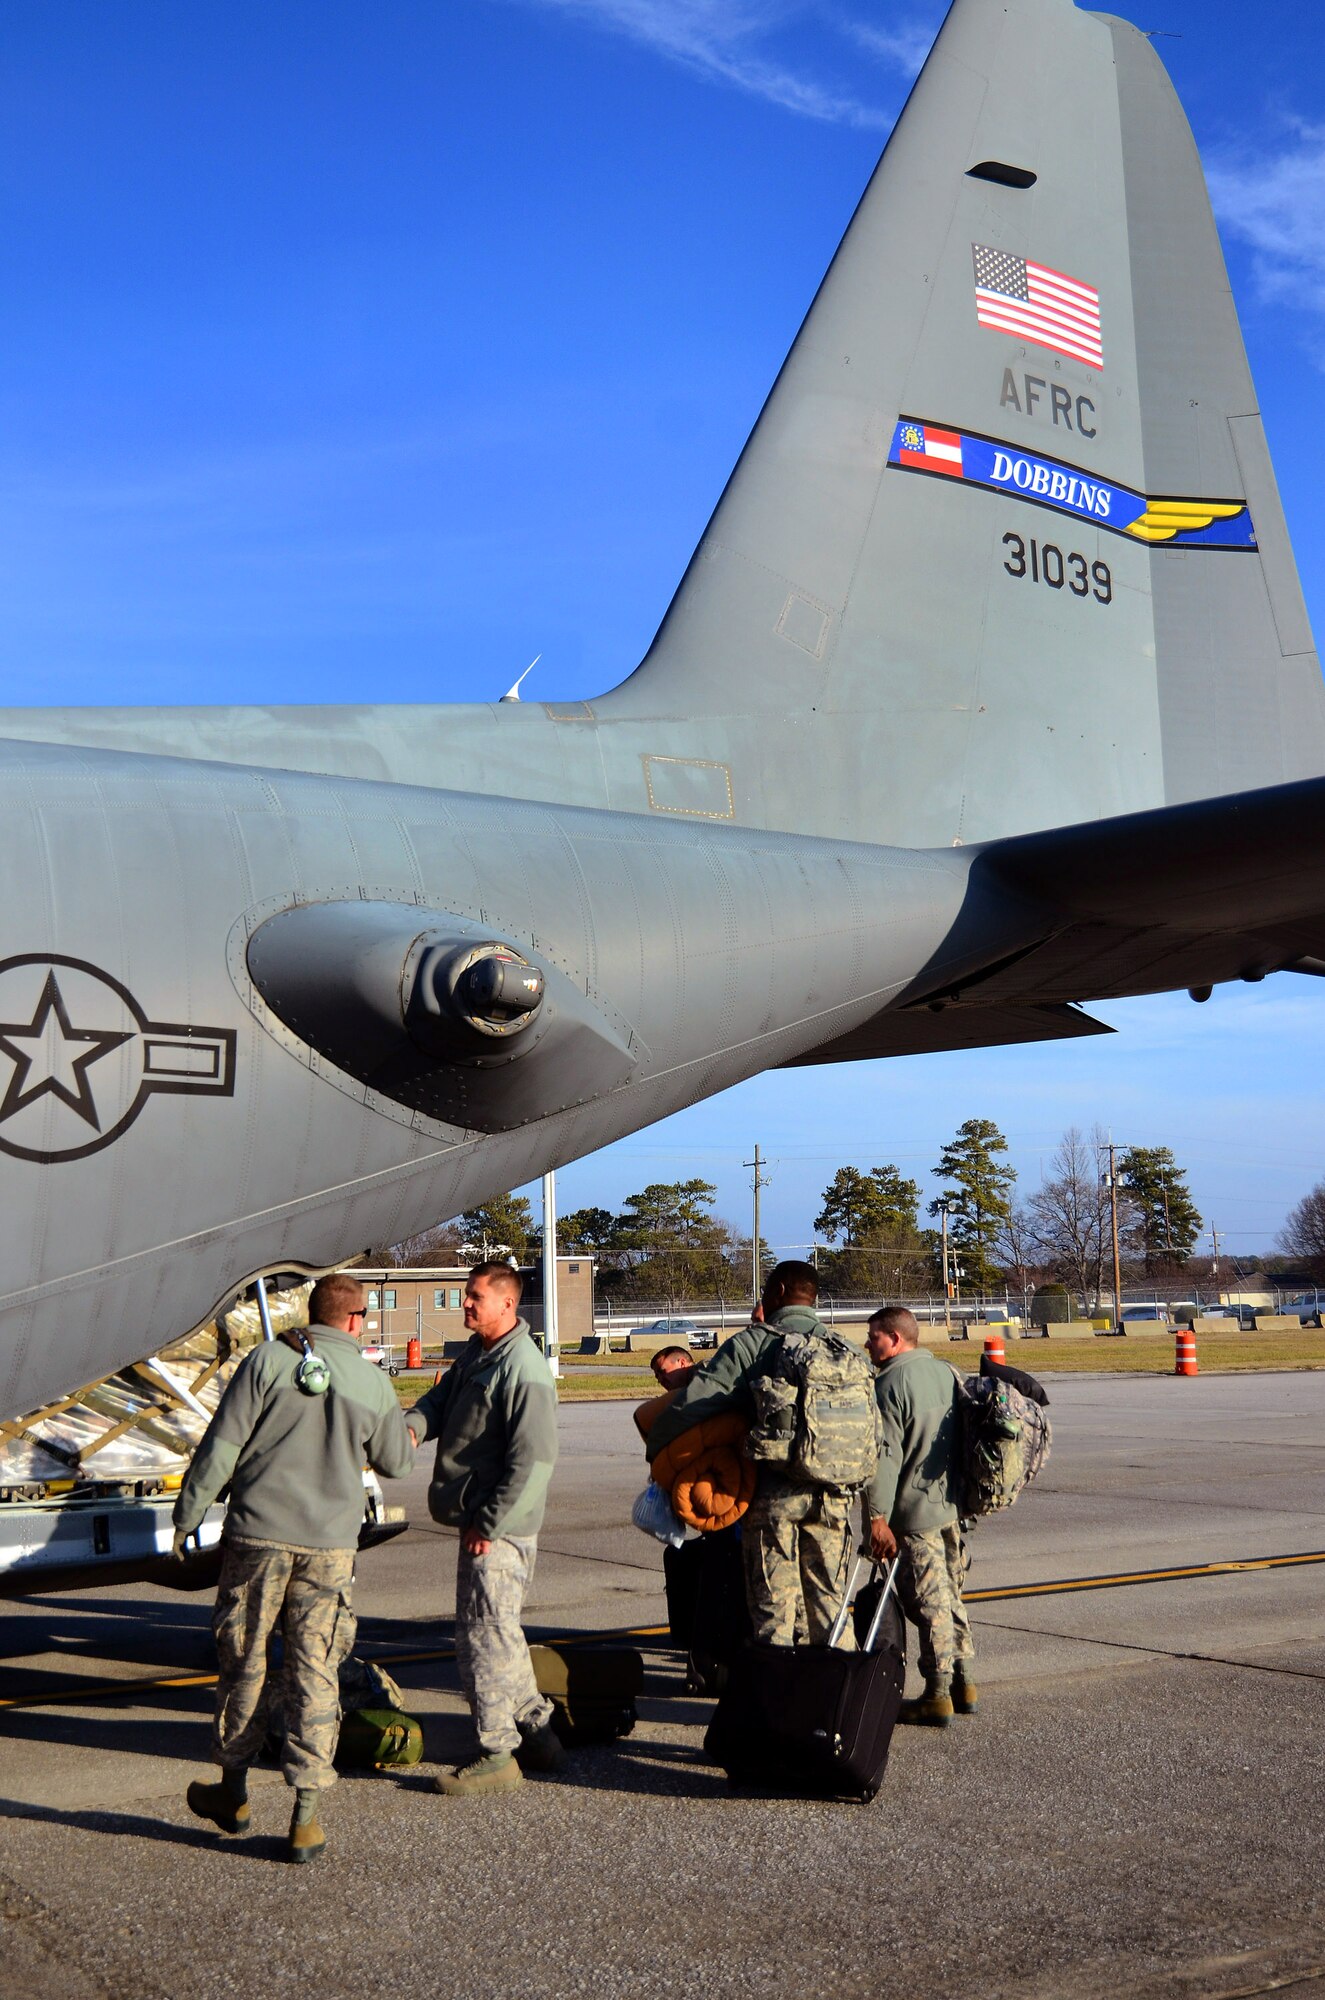 Deploying members of the 94th Airlift Wing bring their personal bags to the back of the C-130H for loading prior to takeoff for their Southwest Asia deployment, Jan. 5, 2015 at Dobbins Air Reserve Base, Ga.  (U.S. Air Force photo/Brad Fallin)